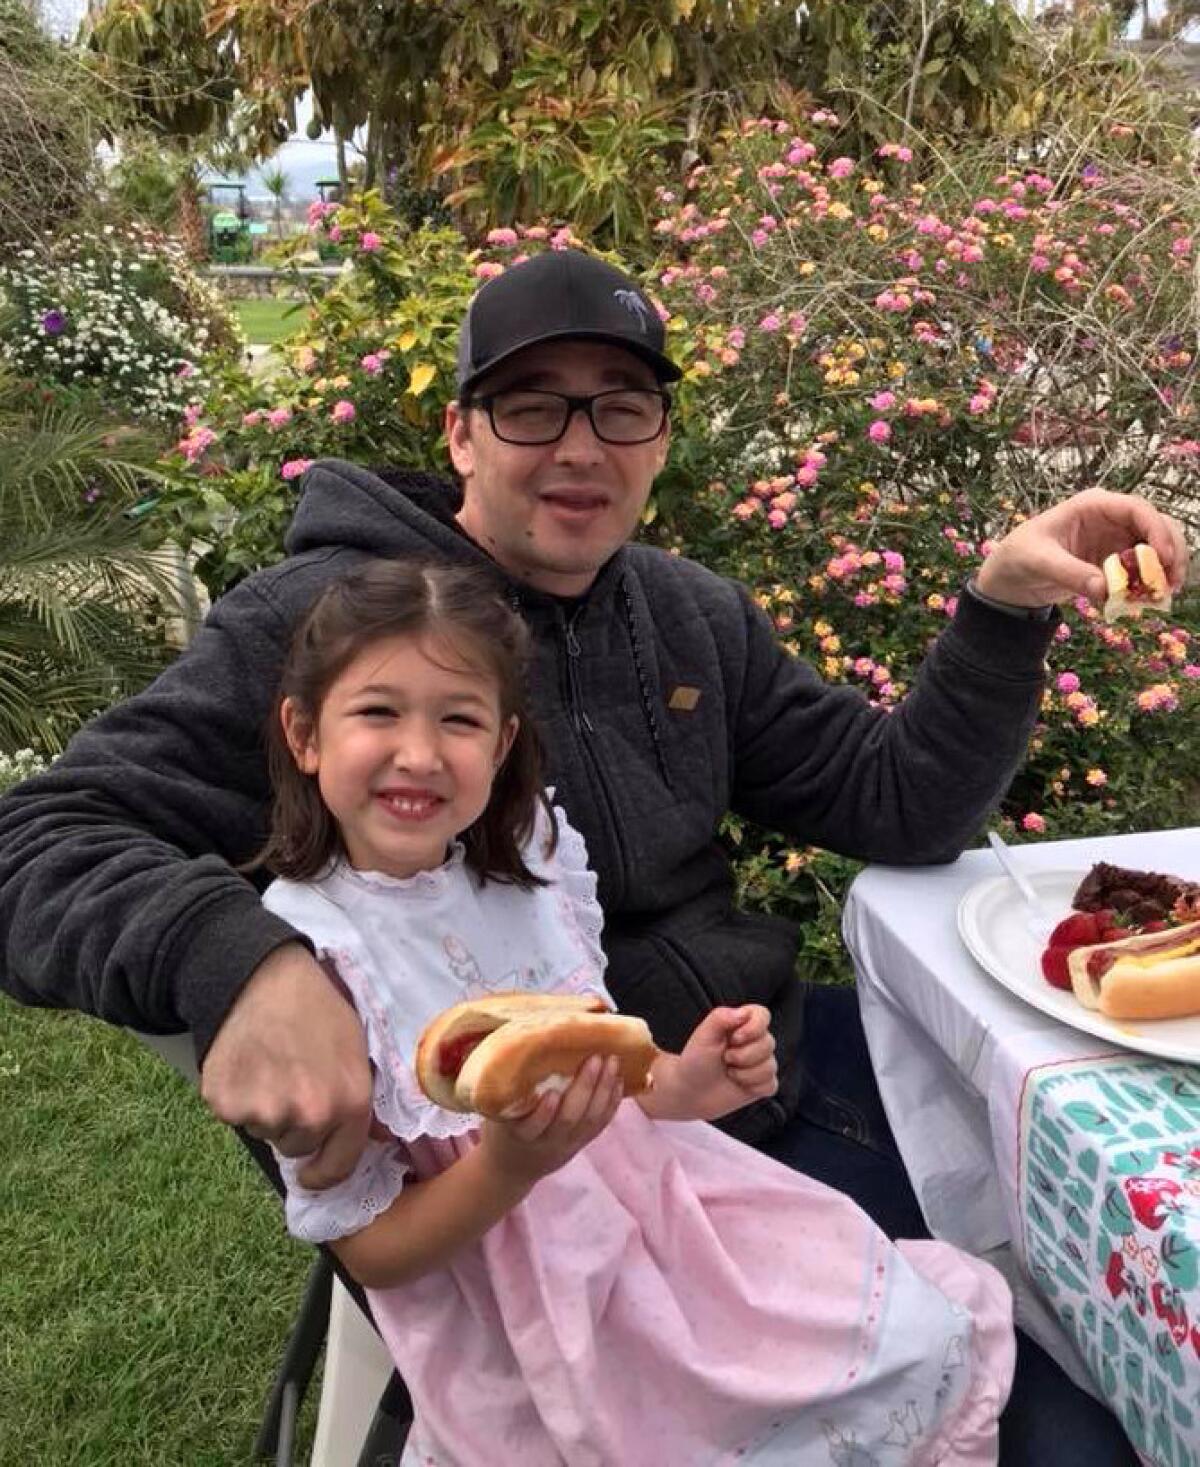 Anthony Mele Jr. and his 5-year-old daughter, Willow.